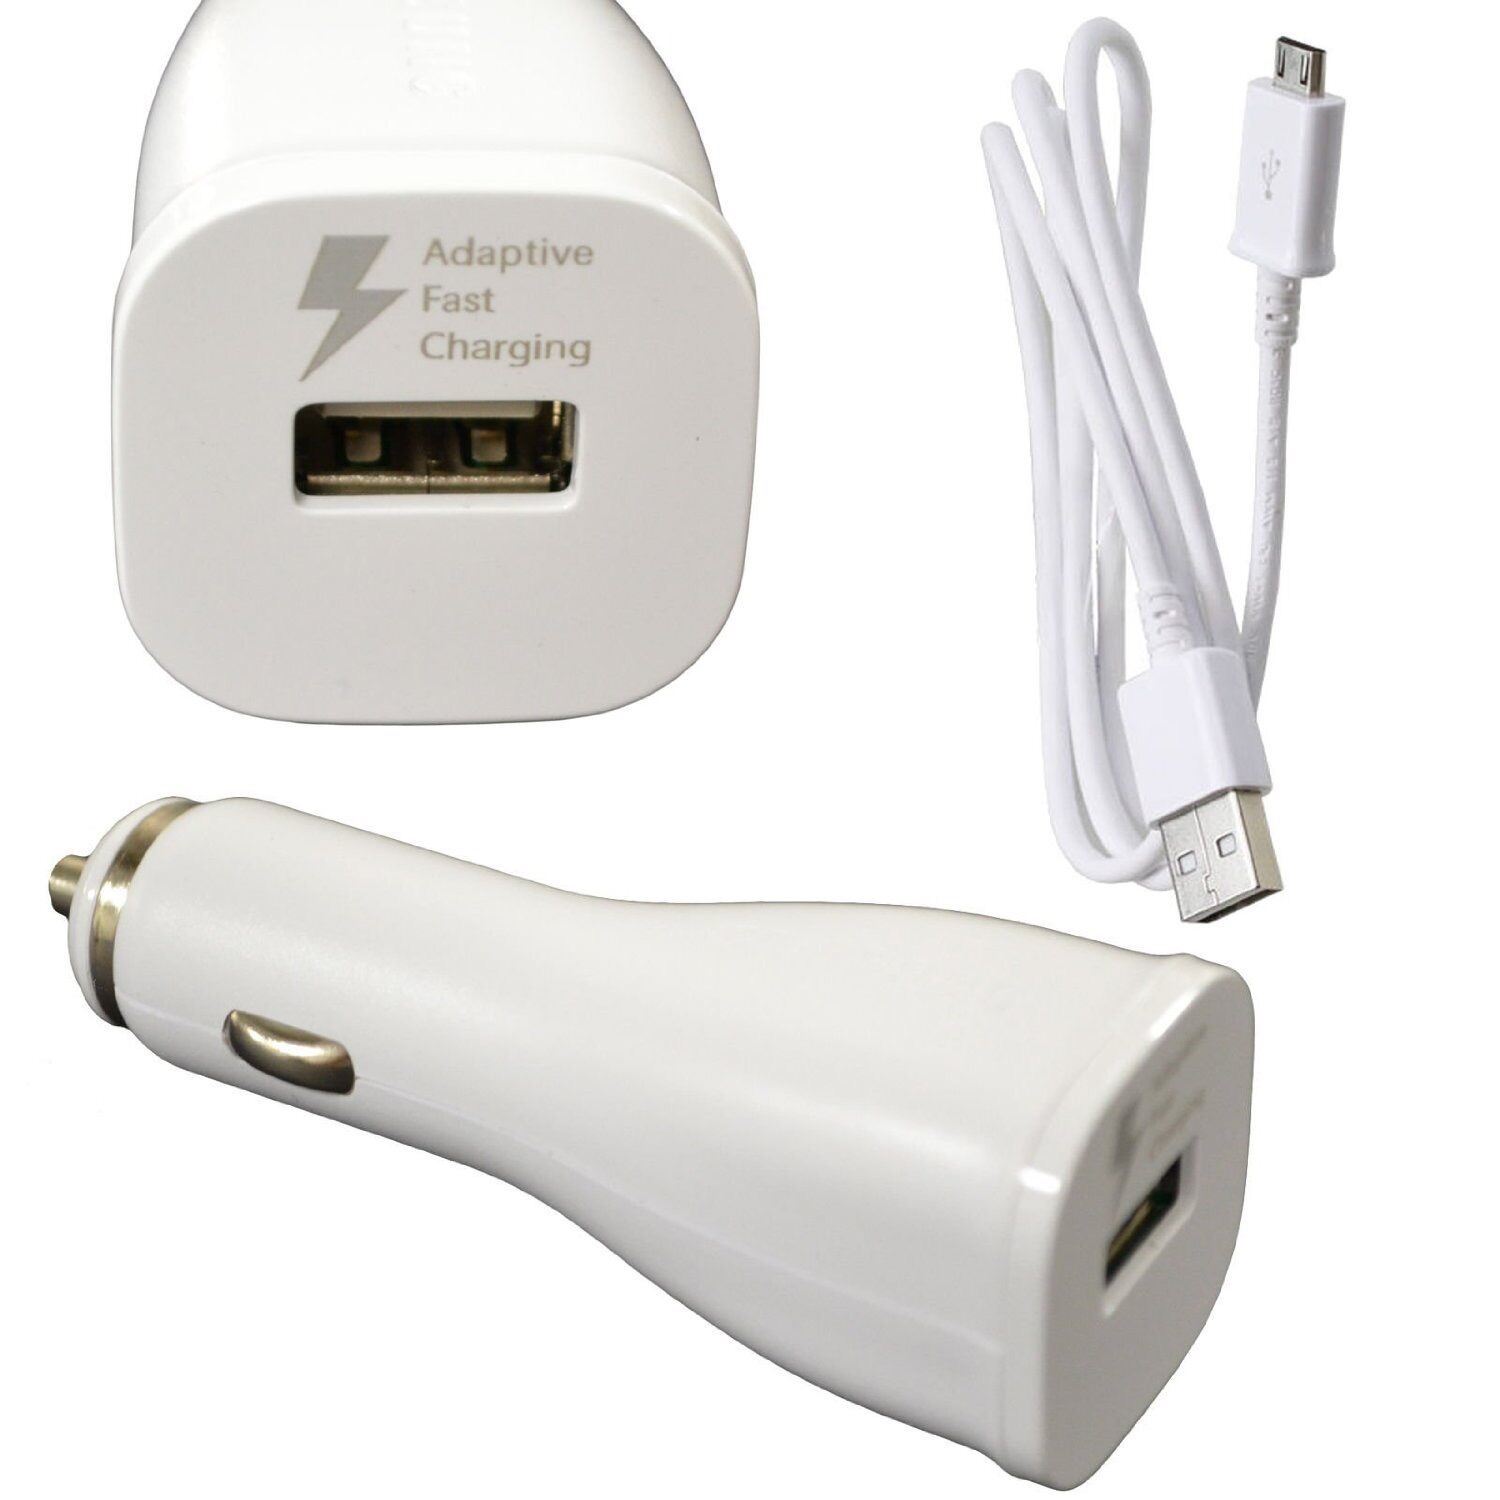 Fast Charging USB Car Charger for Samsung S6/S6 Edge